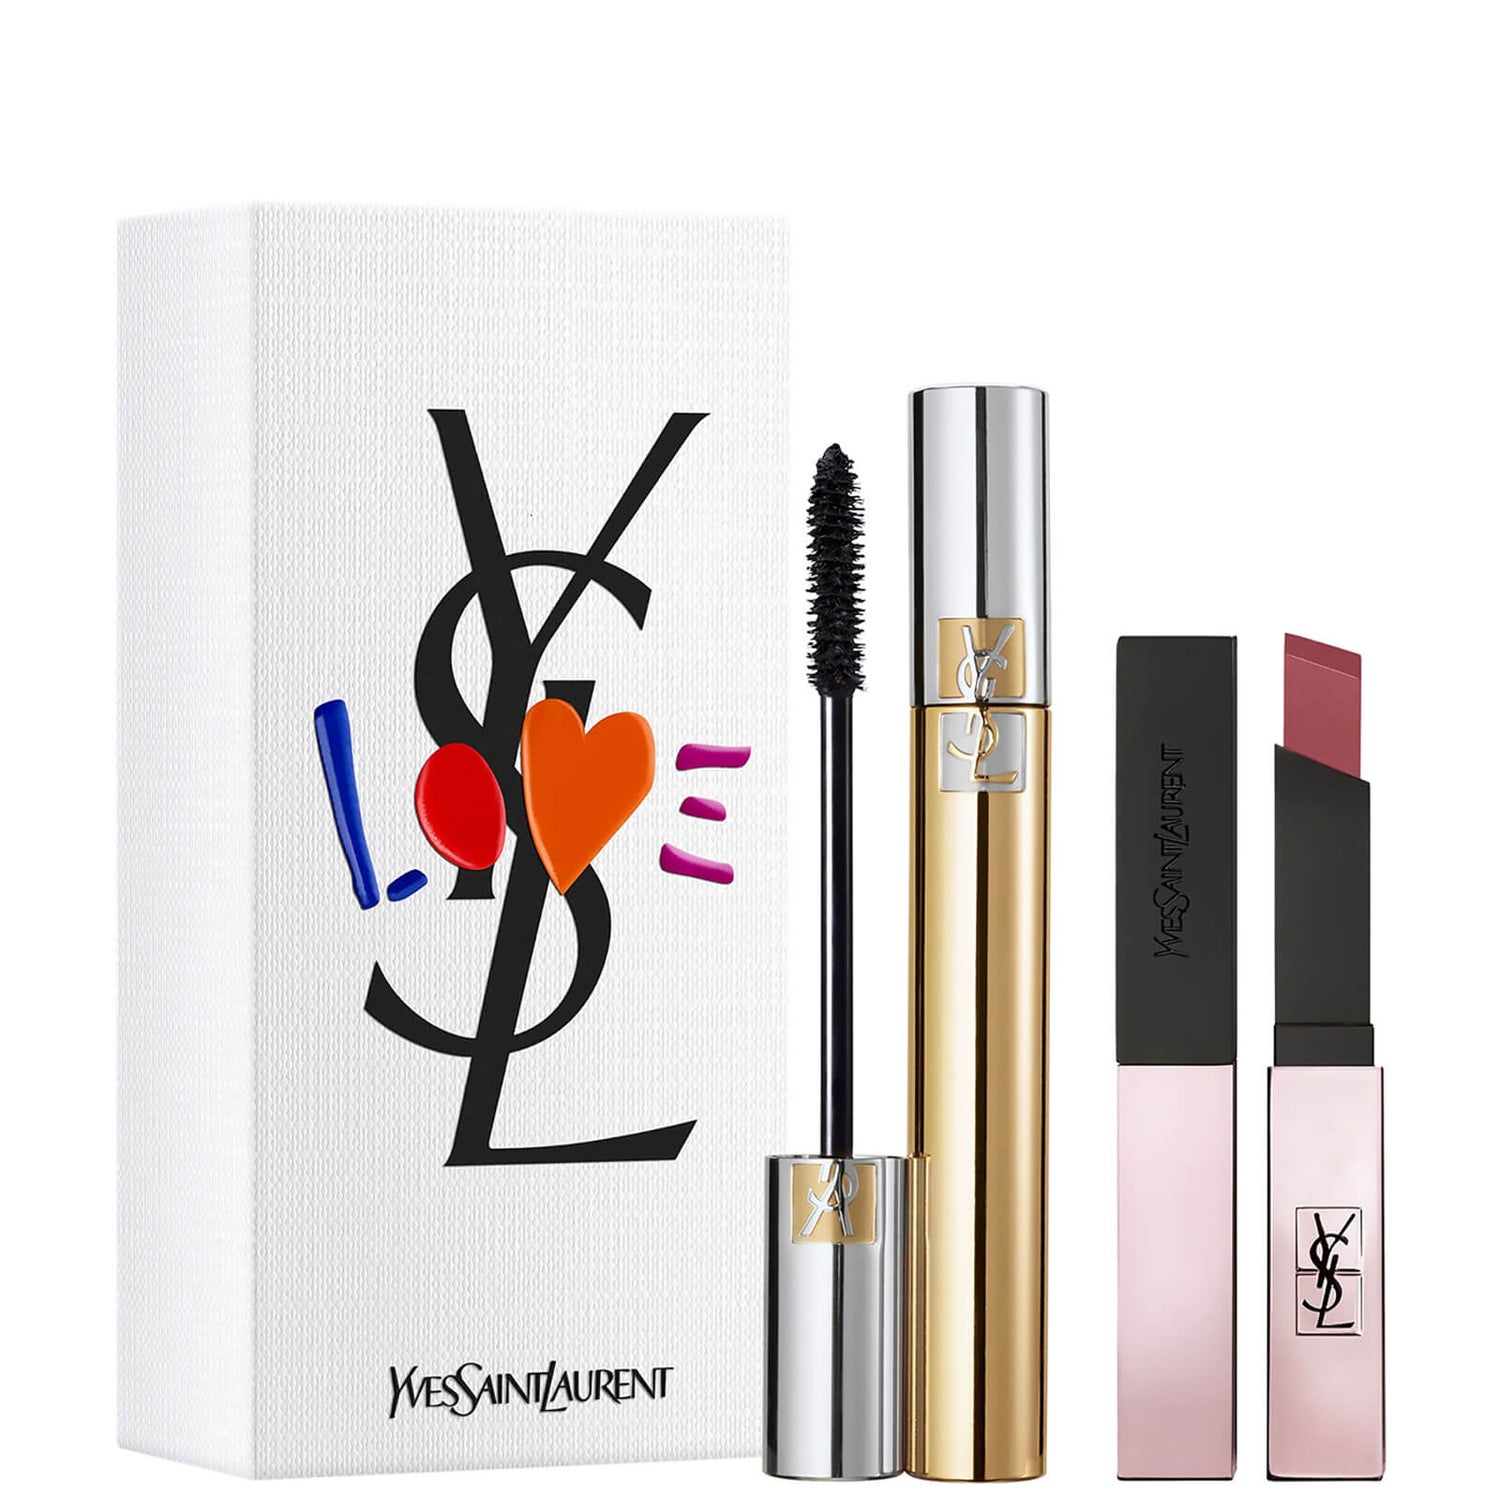 YSL Mascara Volume Effet Faux Cils and The Slim Lipstick Duo (worth £56.00)